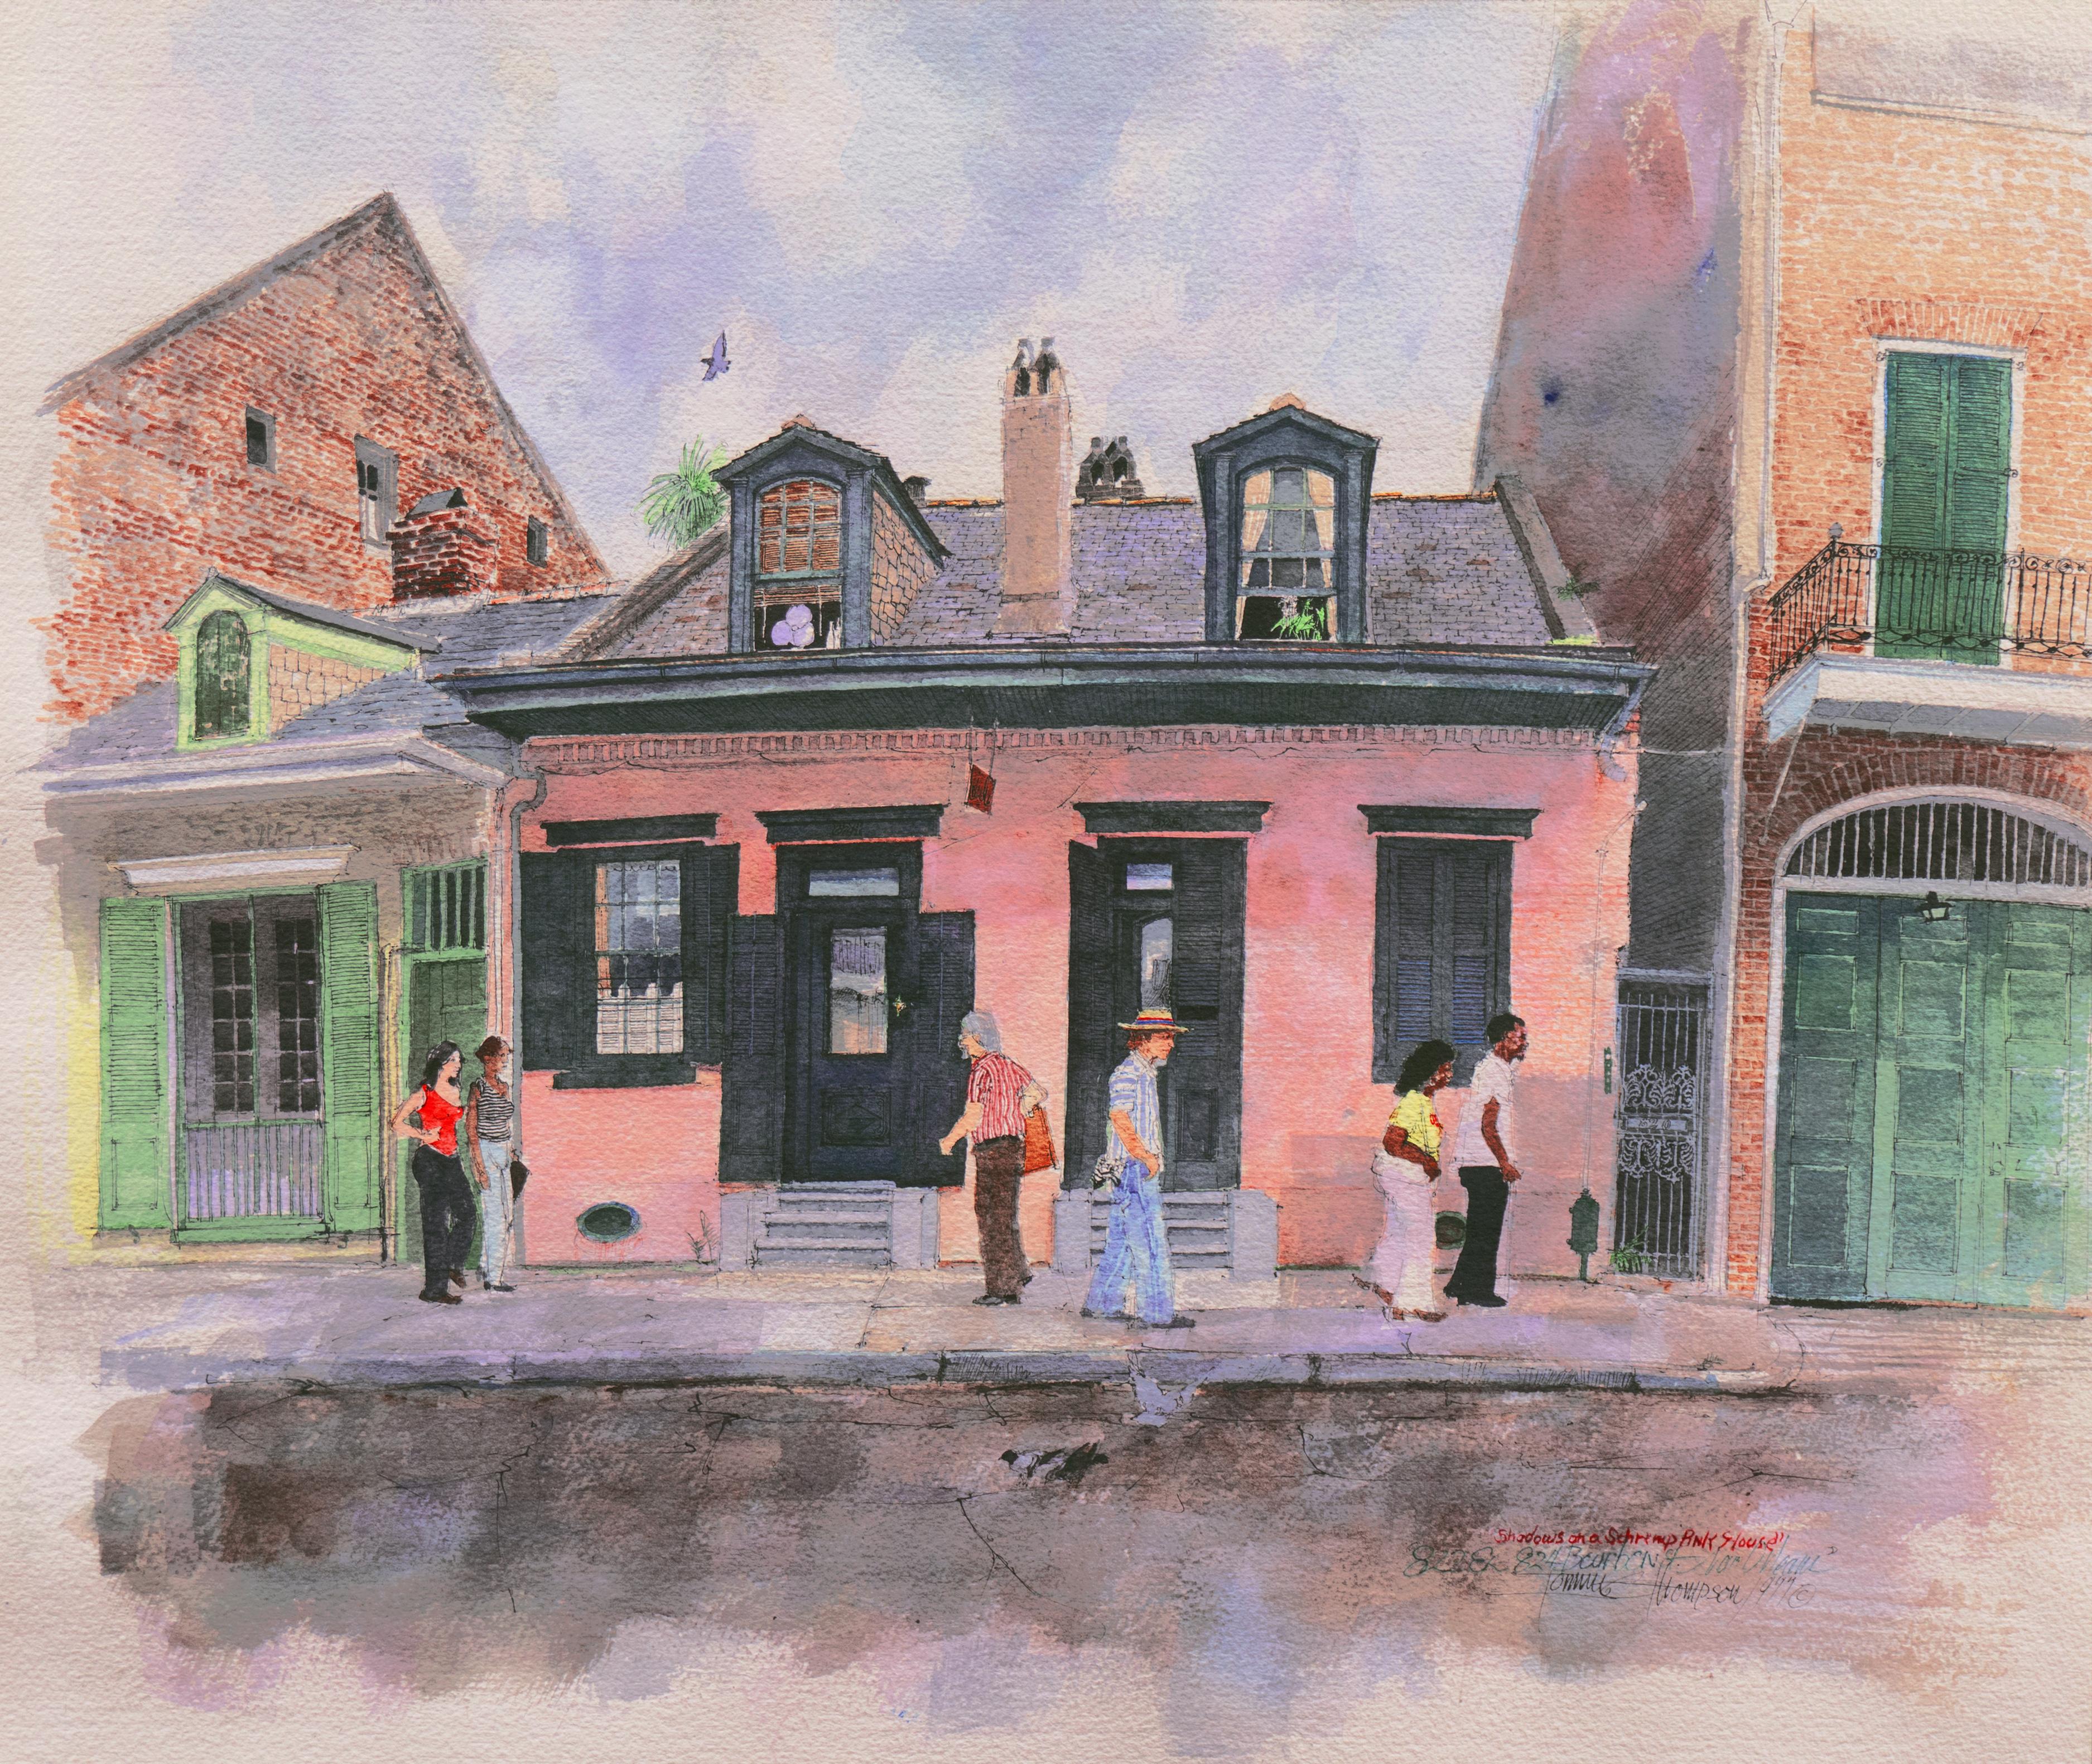 Tommy Thompson Figurative Art - 'Shadows on a Shrimp Pink House', Bourbon Street, New Orleans French Quarter